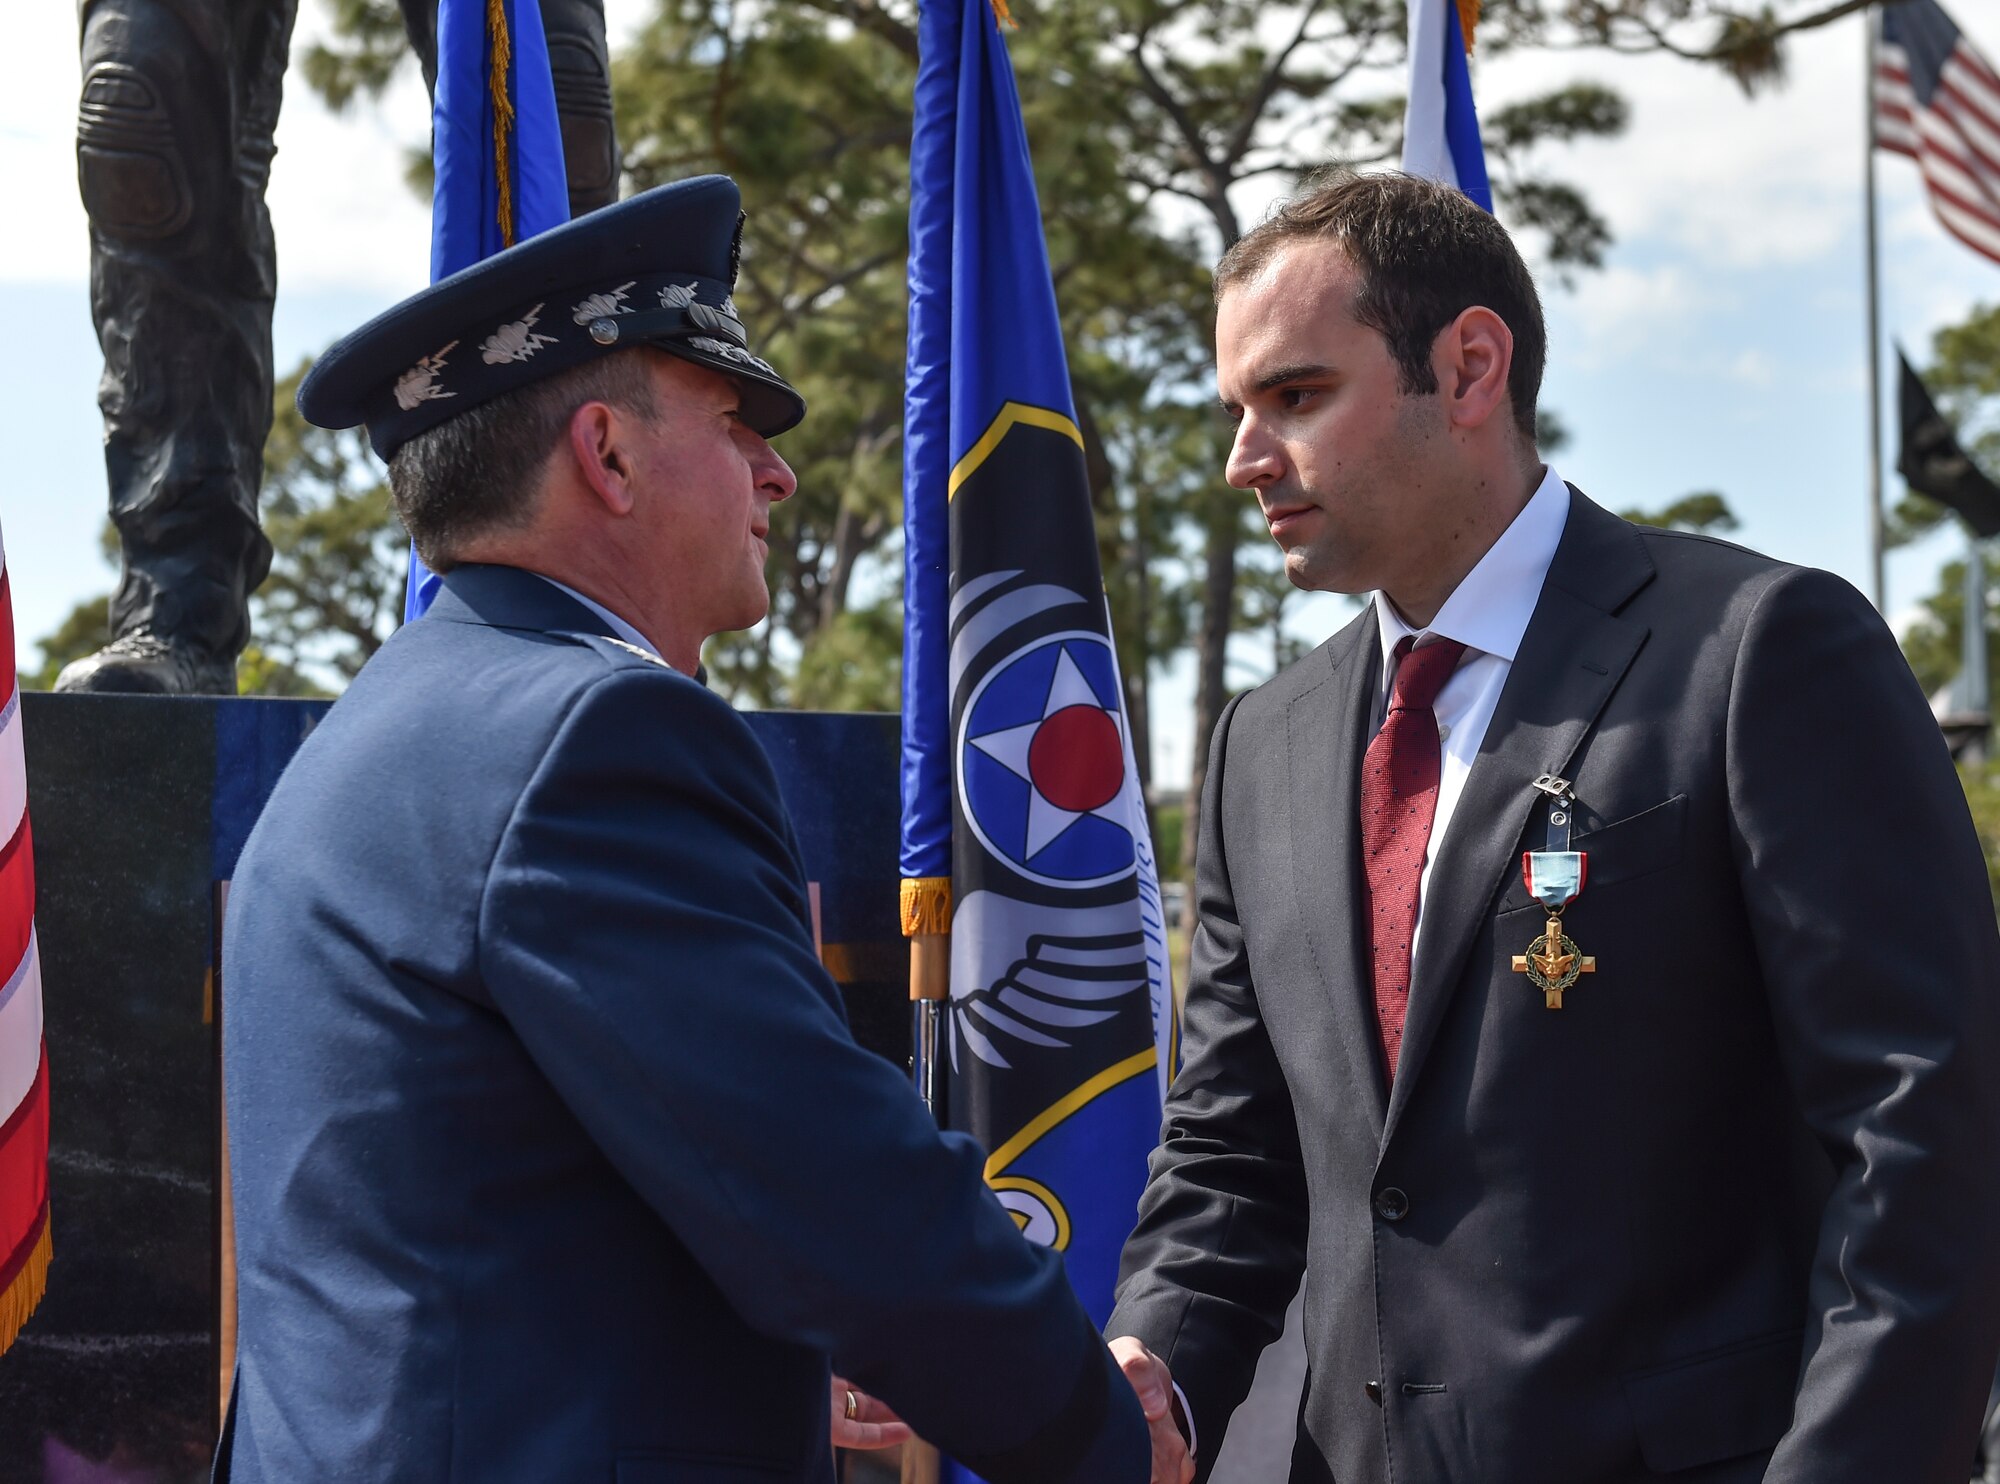 Chief of Staff of the Air Force, Gen. David L. Goldfein, presents Chris Baradat, a combat controller since seperated, the Air Force Cross at Hurlburt Field, April 20, 2017. For the first time in Air Force history, two Airmen were simultaneously awarded the service’s highest medal for valorous action in combat. Master Sgt. (Ret.) Keary Miller, a retired Special Tactics pararescueman from the Air National Guard’s 123rd Special Tactics Squadron, and Baradat both received Silver Star medals for their actions in combat, which were upgraded after a service-wide review. (U.S. Air Force photo by Senior Airman Ryan Conroy) 